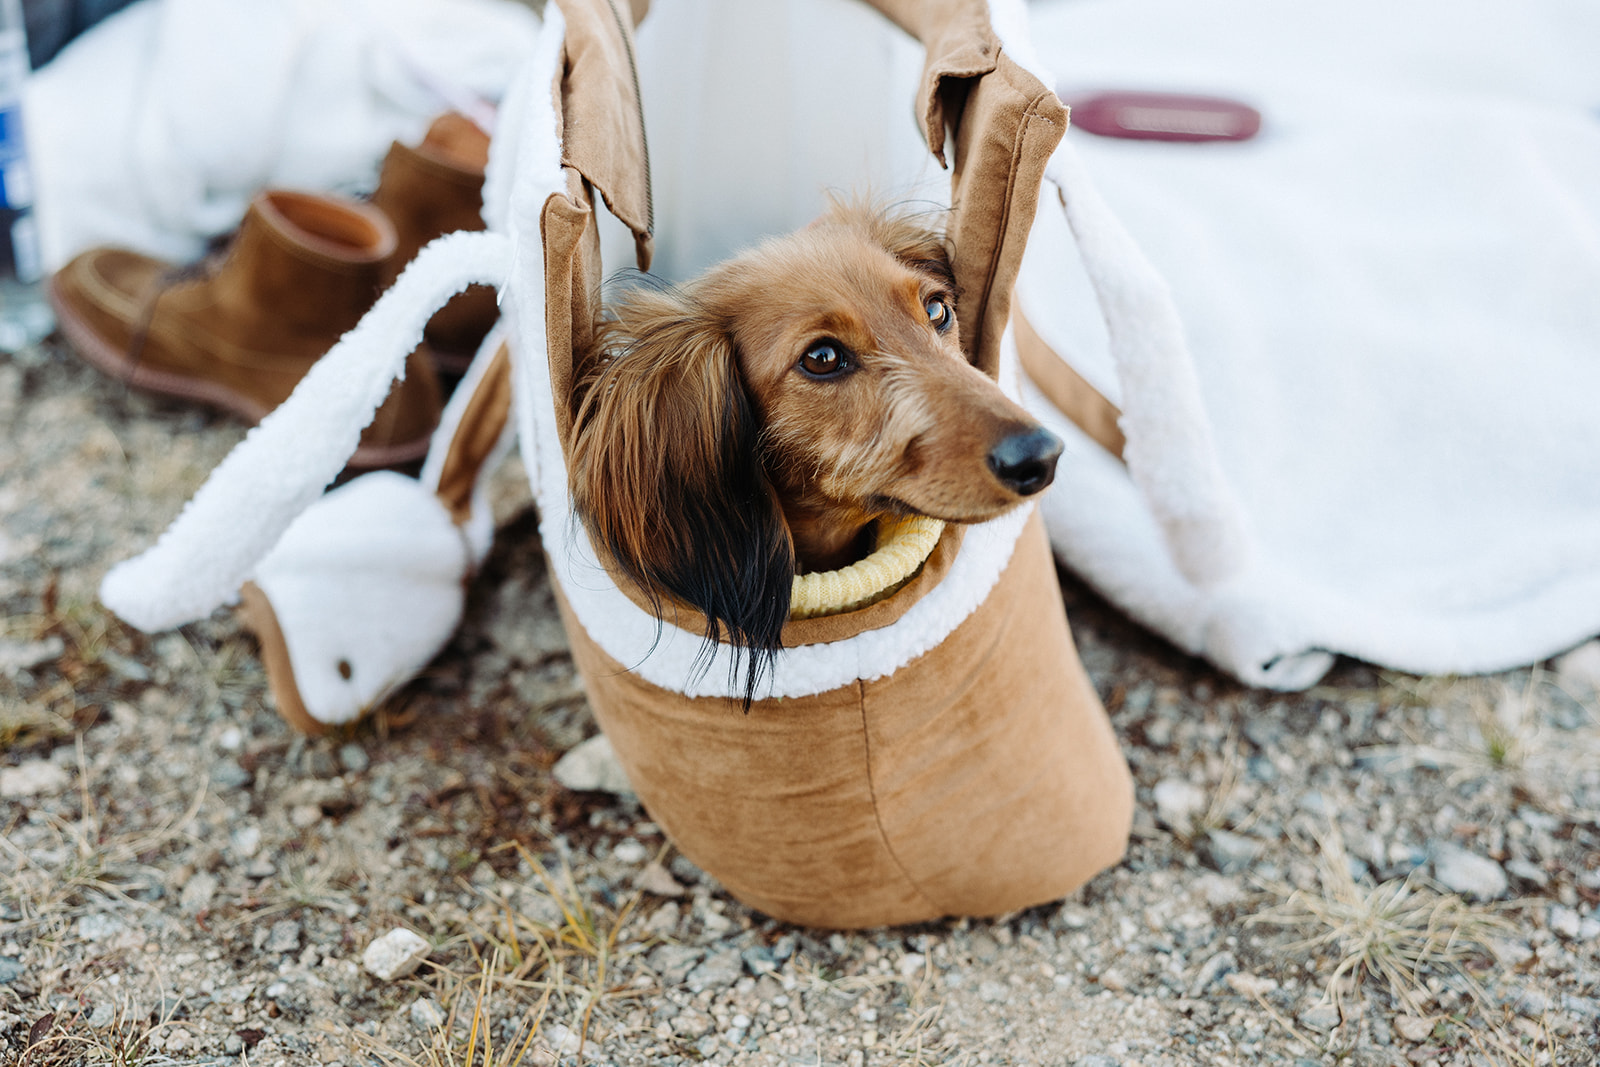 The engaged couple's cute little dog, a brown Dachshund, sitting in a short brown bag as he awaits his parents. 